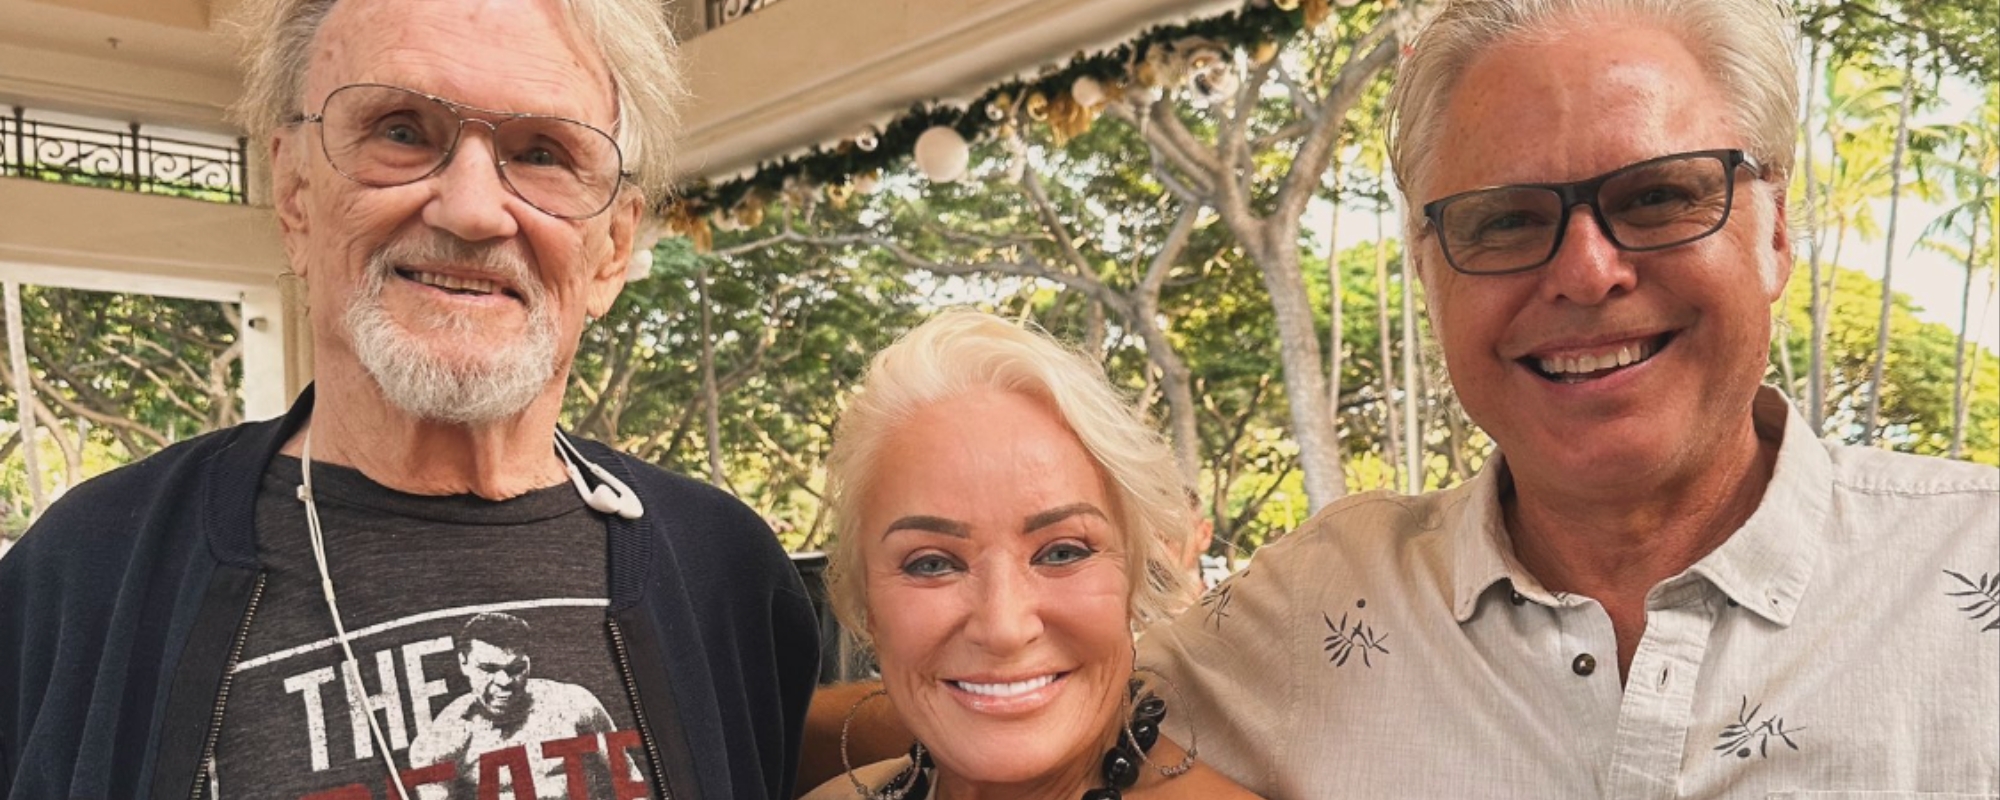 Tanya Tucker Shares Sweet Moment With Country Legend Kris Kristofferson